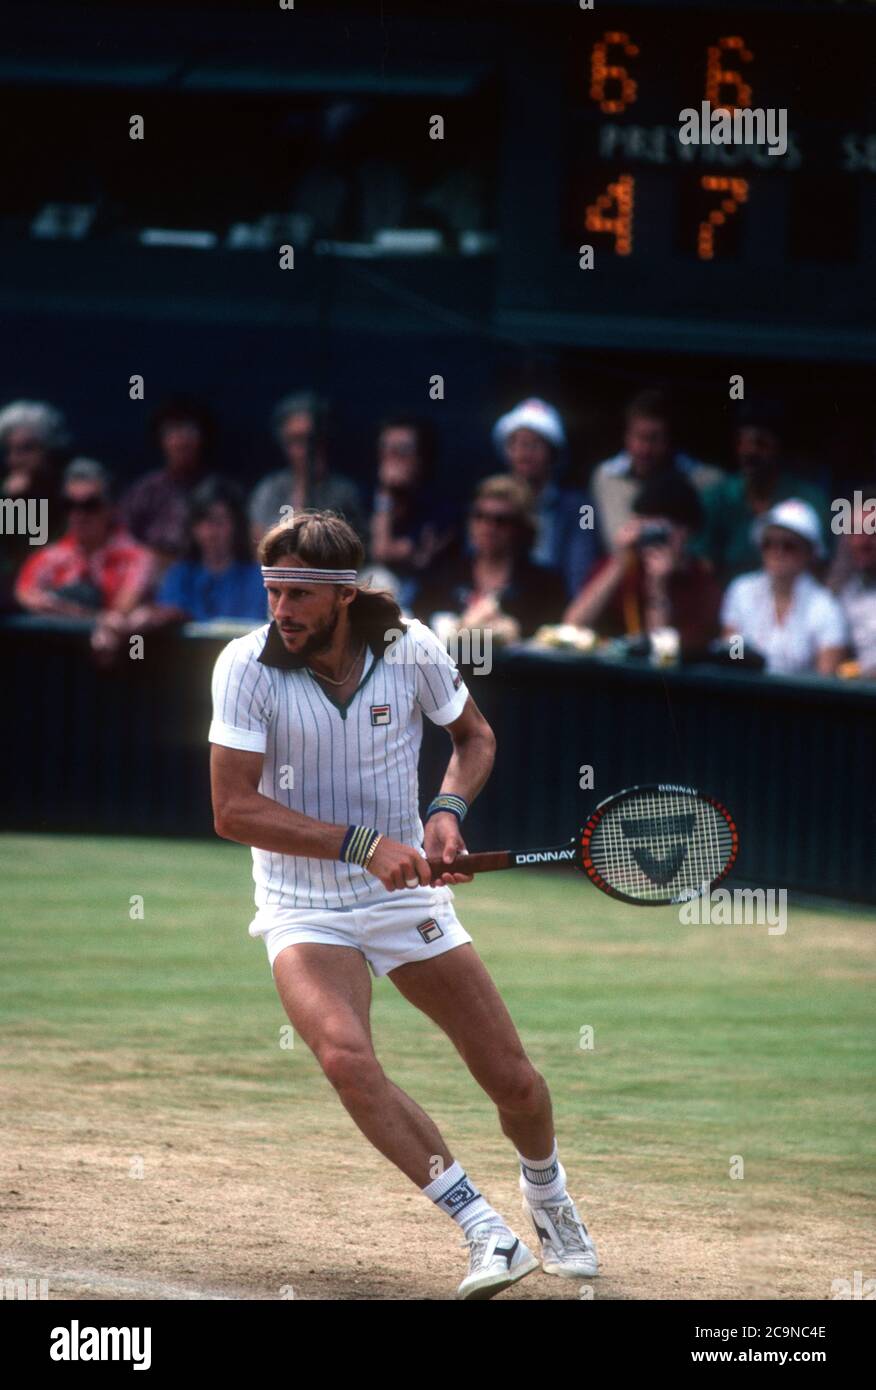 Bjorn Borg approaching a backhand during a match on Centre Coyrt at Wimbledon in 1981. Stock Photo